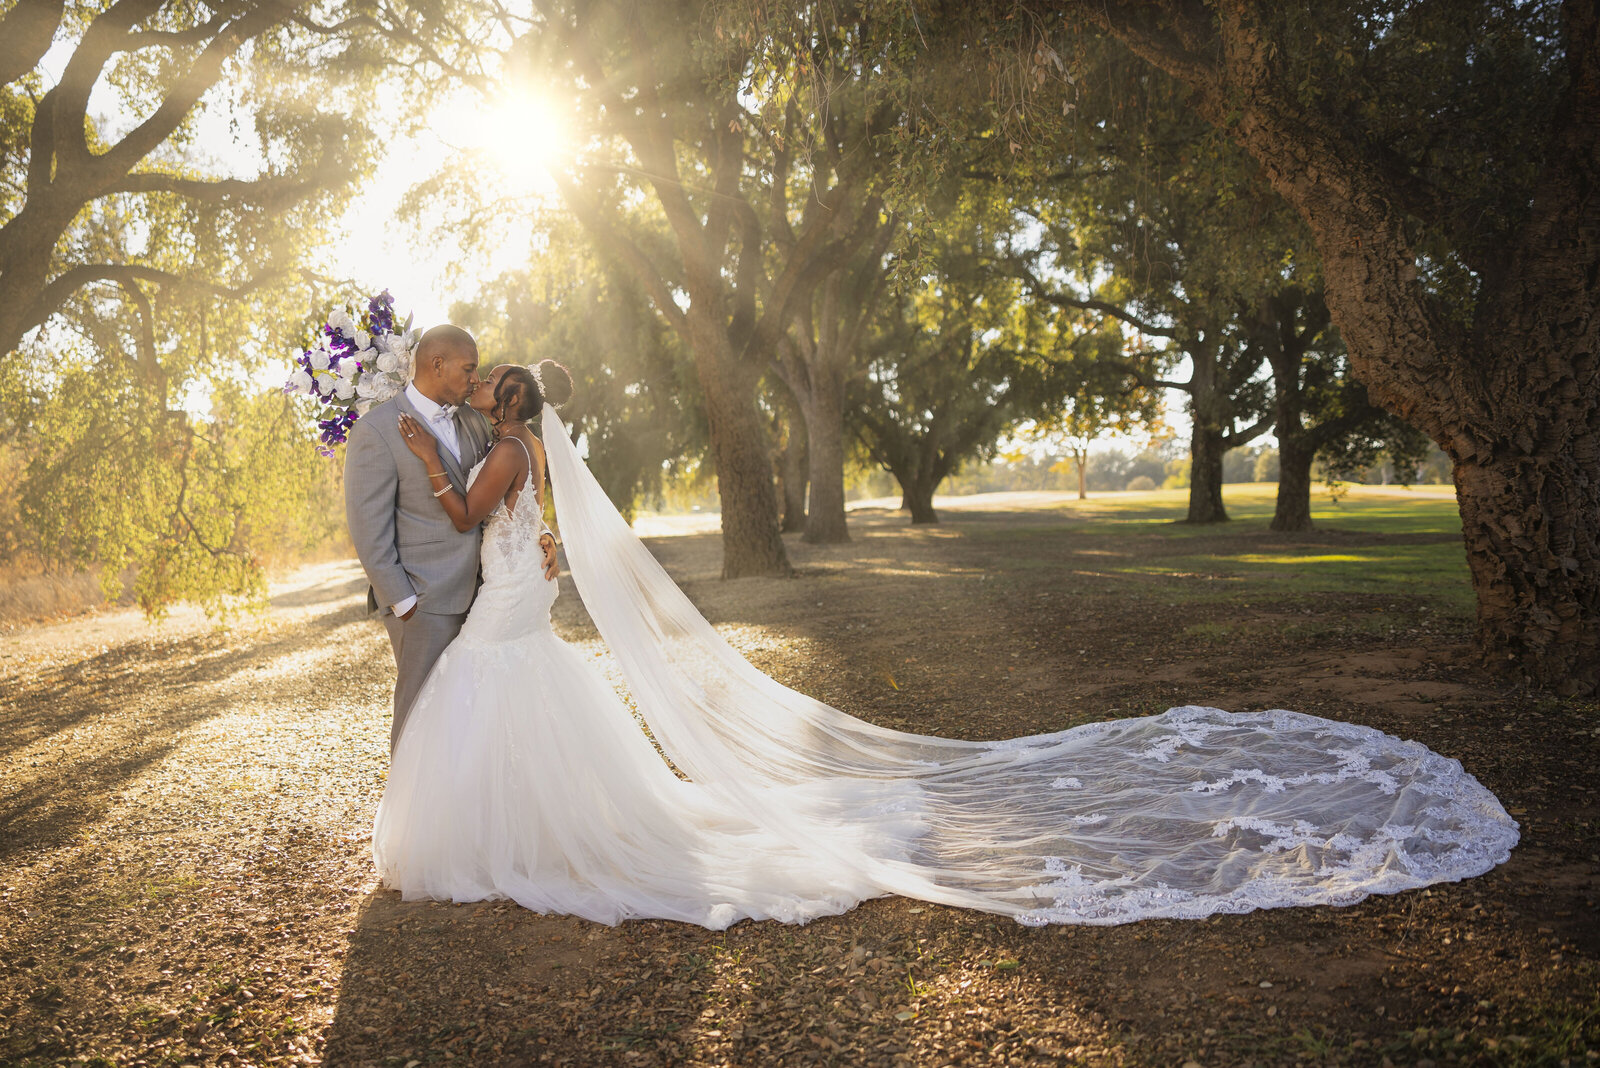 Bride and groom kiss in trees at sunset, photo by wedding photographer in Sacramento, CA Philippe Studio Pro.